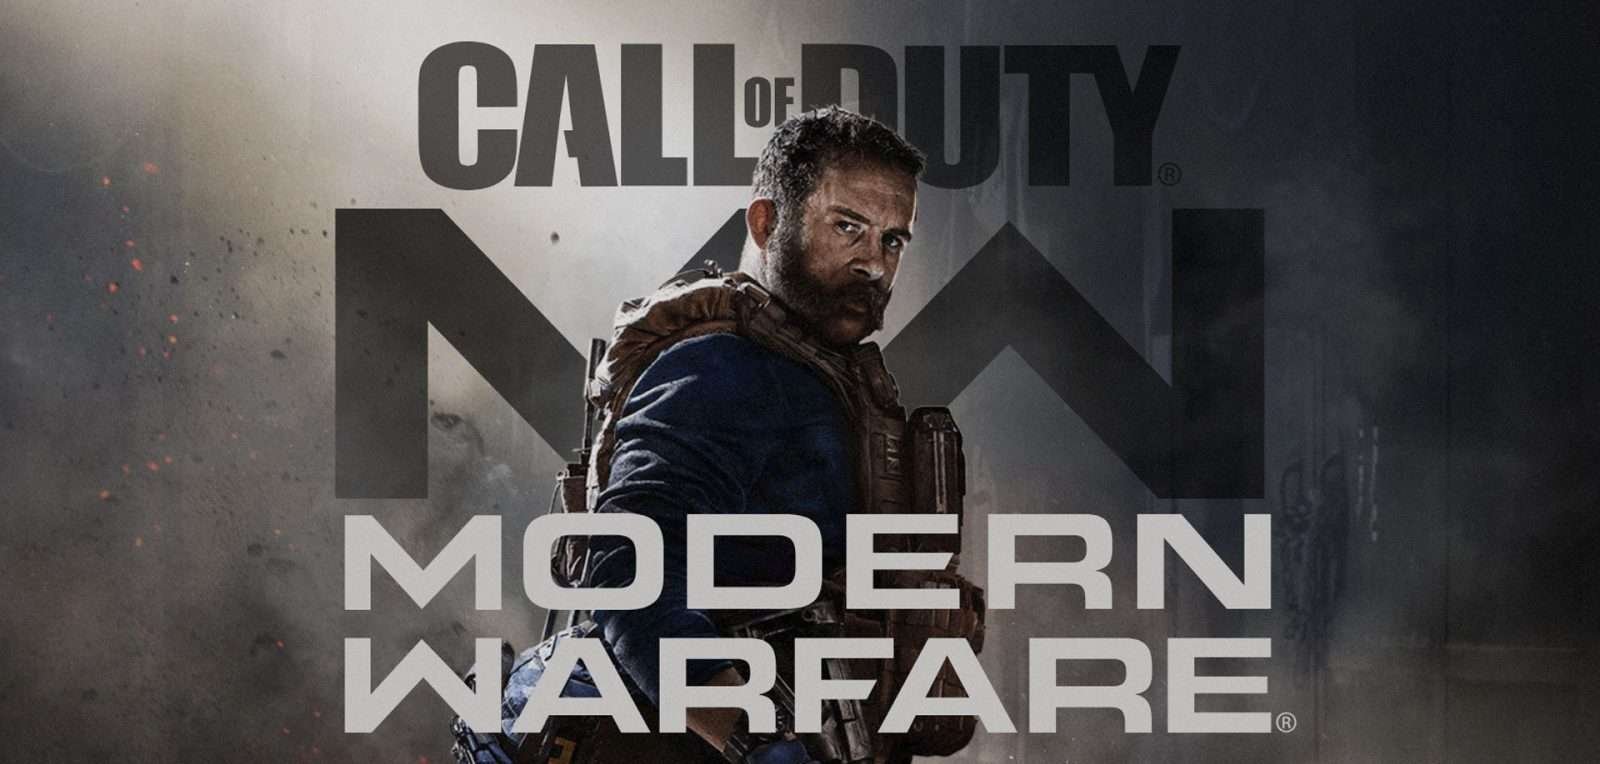 Call of Duty Modern Warfare 4 - 2019 official image